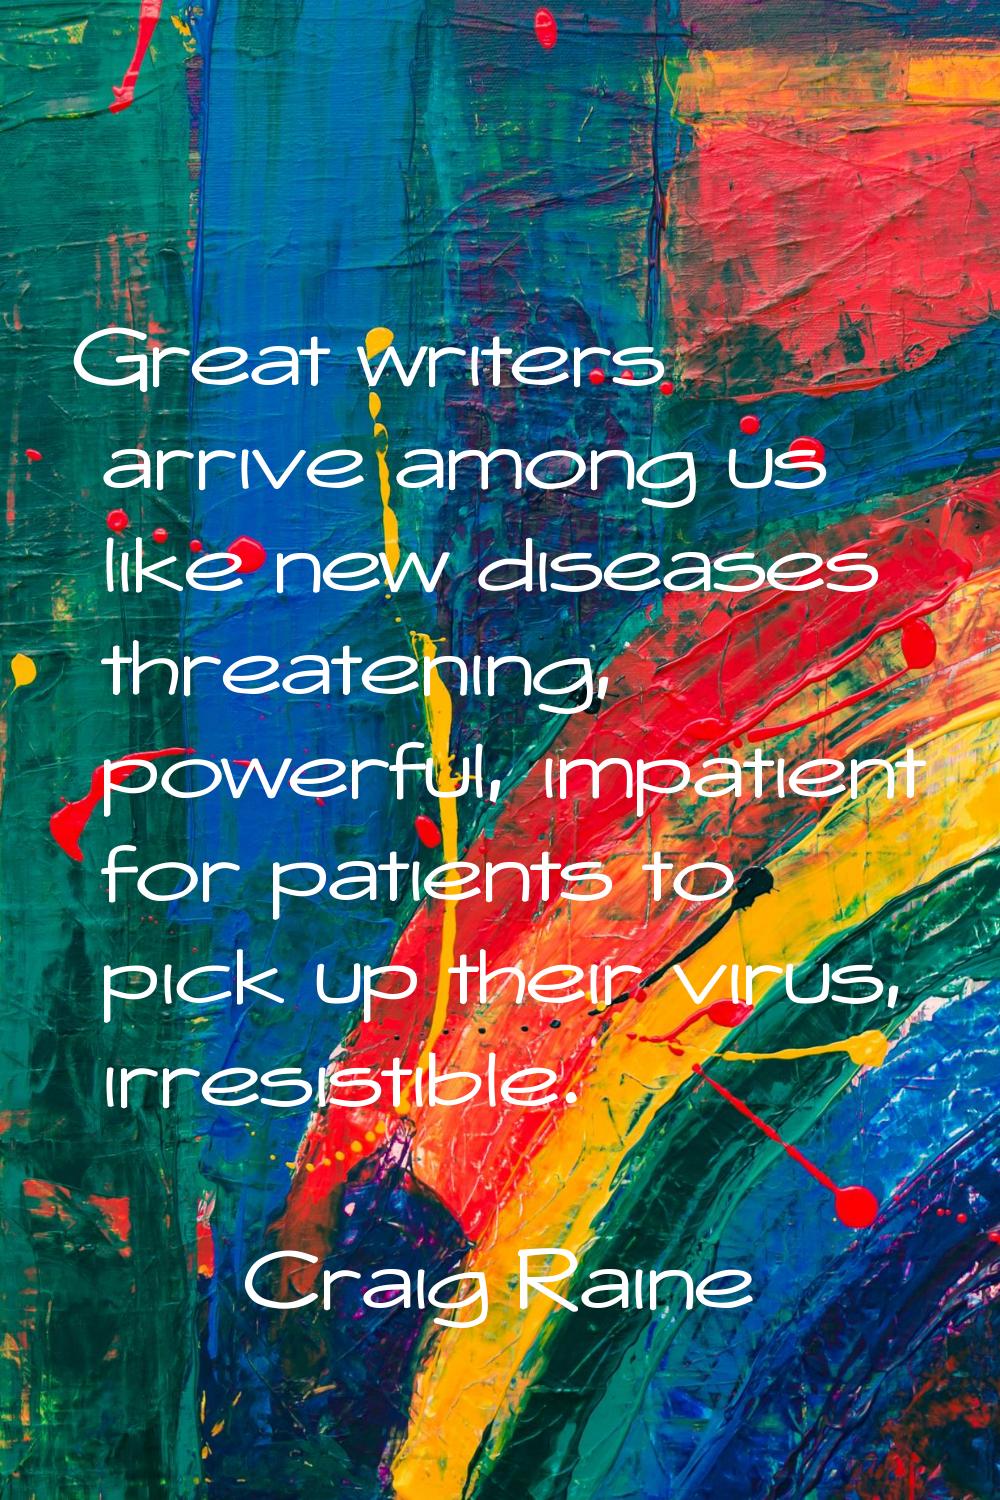 Great writers arrive among us like new diseases threatening, powerful, impatient for patients to pi